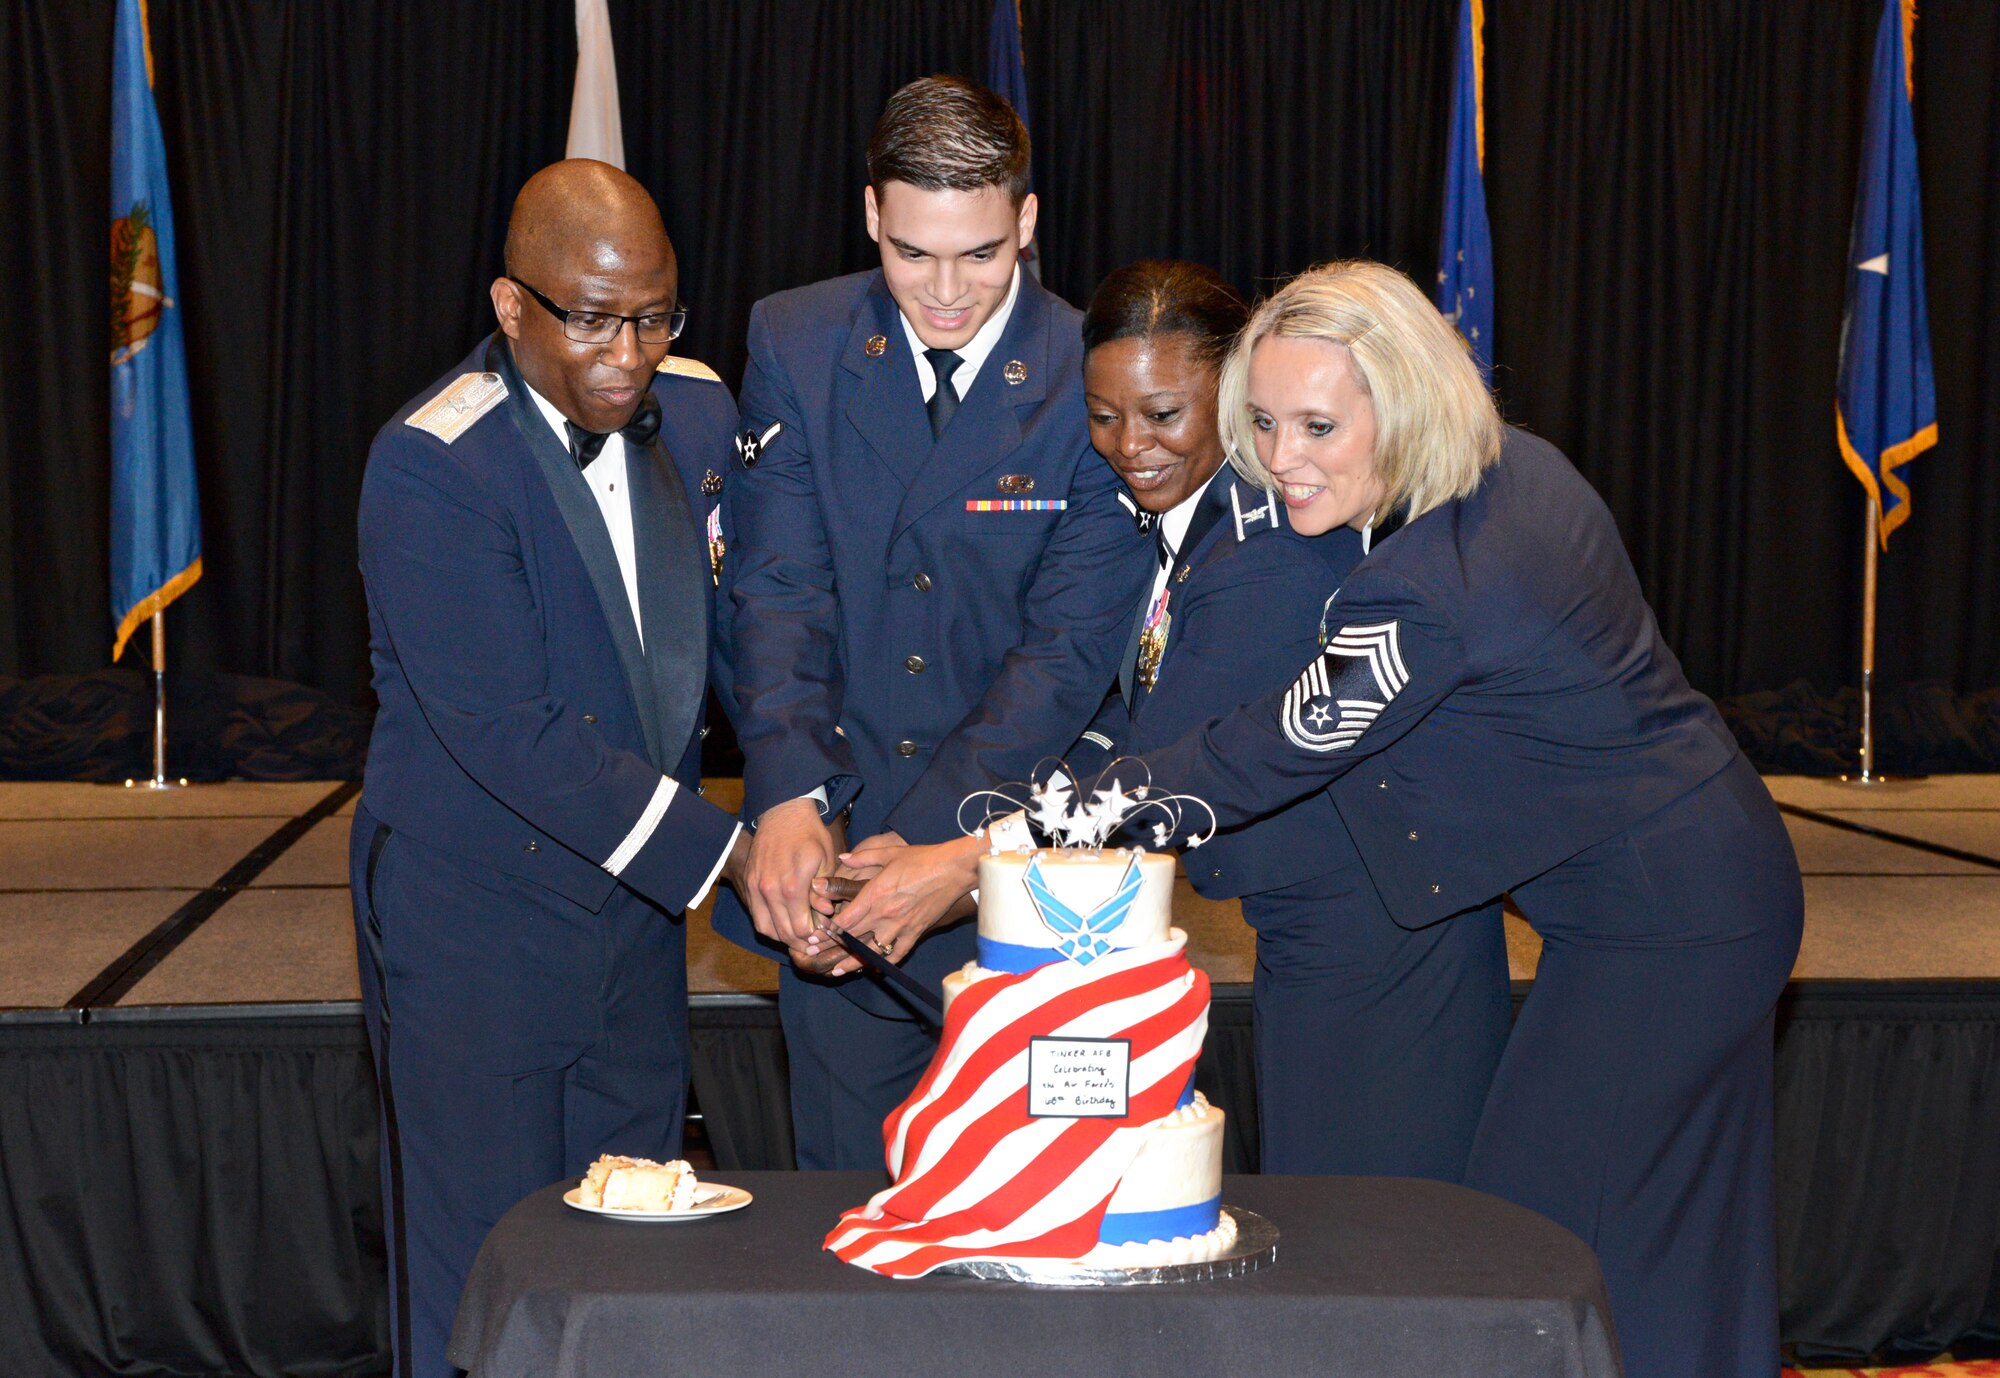 Cutting the ceremonial cake at the Sept. 12 Air Force Ball are, from left, Brig. Gen. Allen Jamerson, director of Security Forces and deputy chief of staff for Logistics, Engineering and Force Protection  at Headquarters U.S. Air Force; Airman Luis Nieves Gonzalez, 552nd Operations Support Squadron; Col. Stephanie Wilson, 72nd Air Base Wing commander; and Chief Master Sgt. Larae Chapman, 72nd Medical Group. The cake is traditionally cut by the highest ranking or presiding official and the youngest service member in attendance. (Air Force photo by Kelly White/Released)